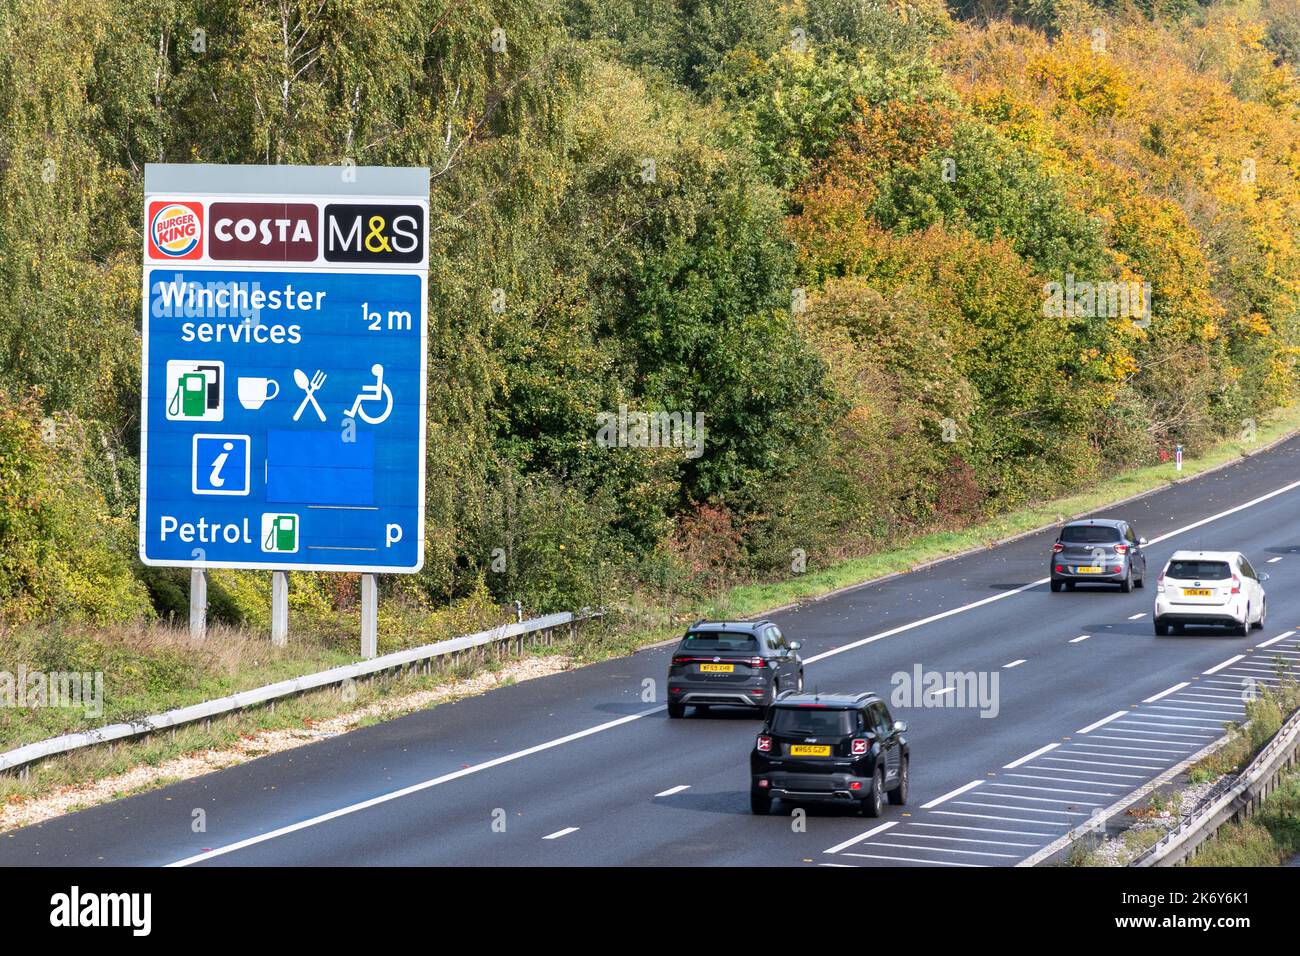 M3 motorway sign for Winchester Services in Hampshire, England, UK. Road sign and traffic near service station. Stock Photo